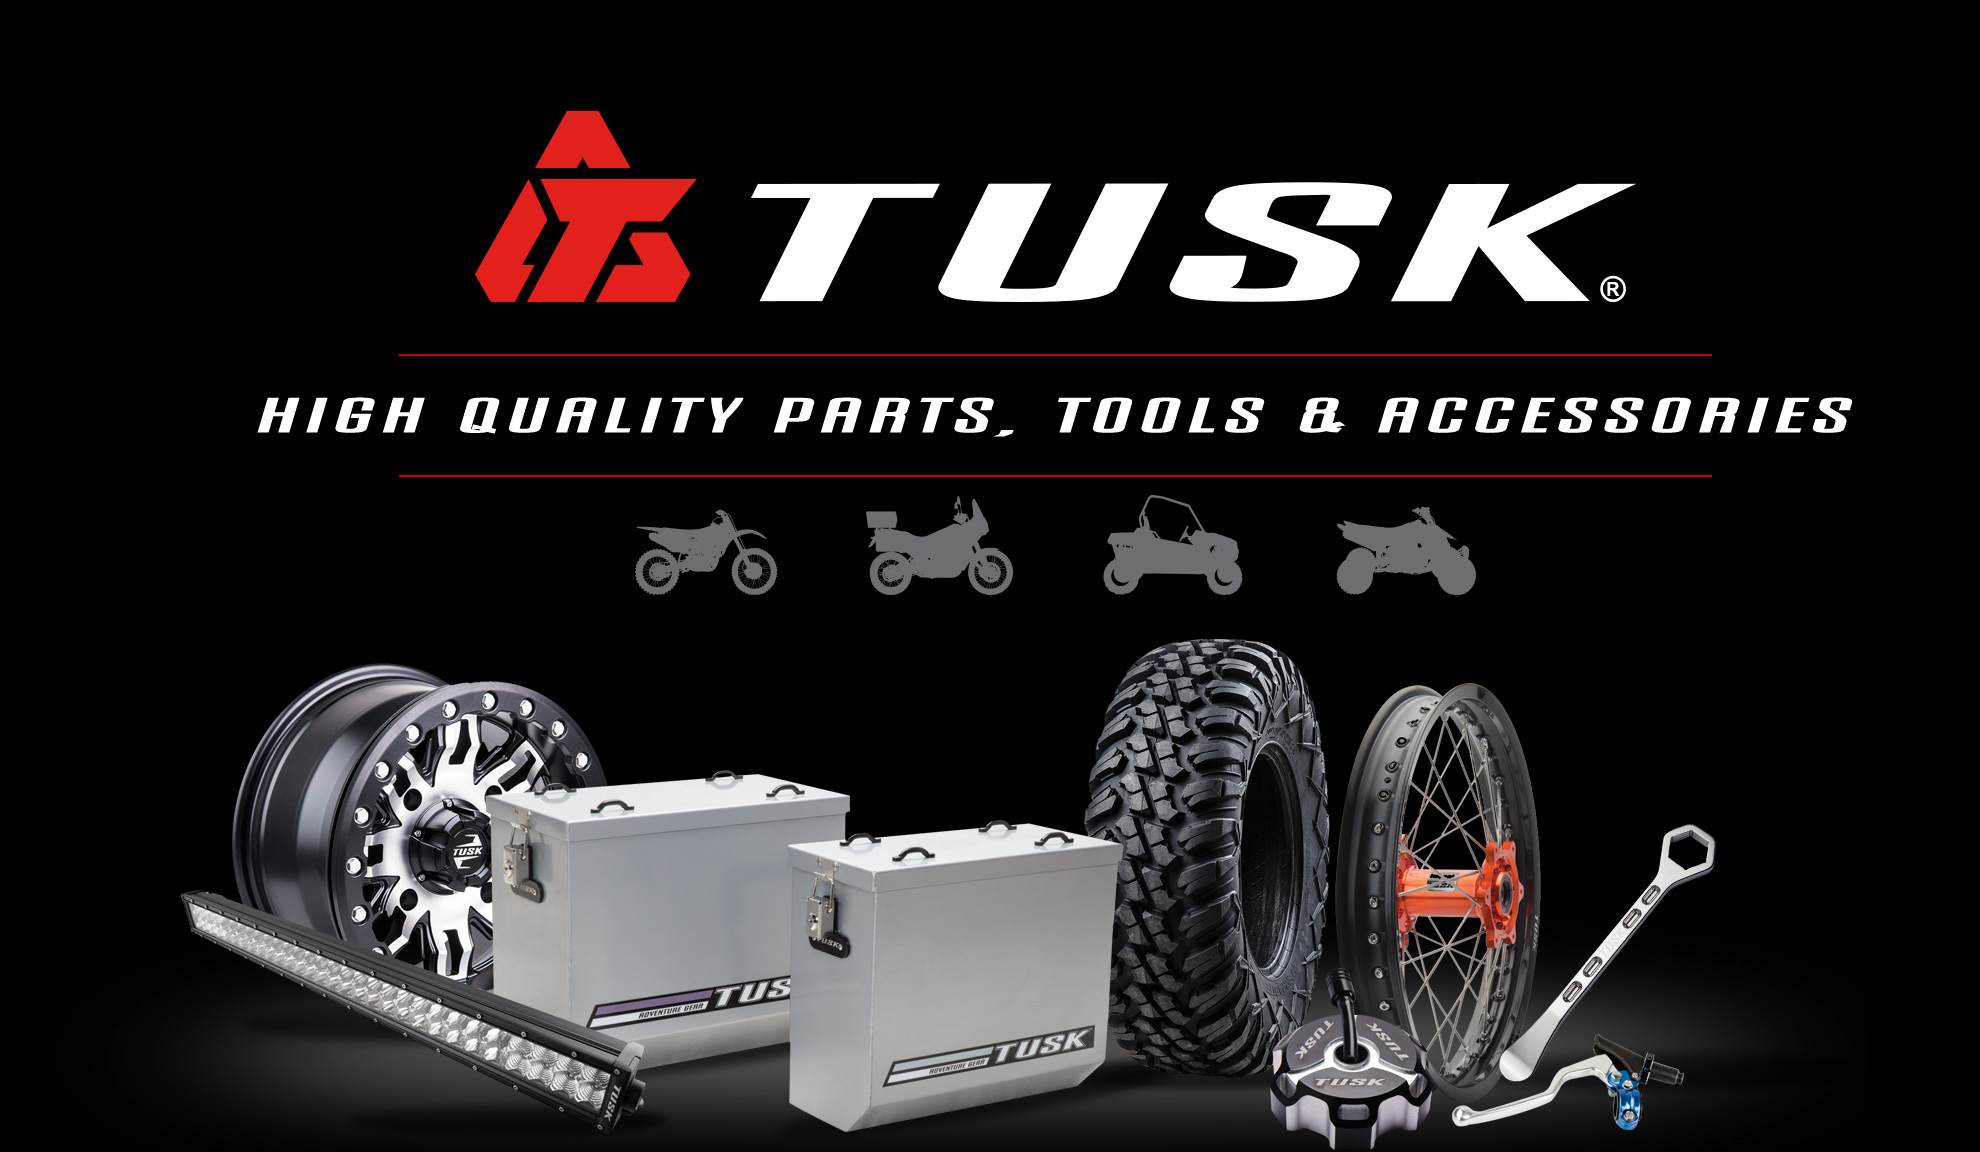 TUSK - Parts and accessories for dirt bikes, UTVs, SxS, ATVs, Dual